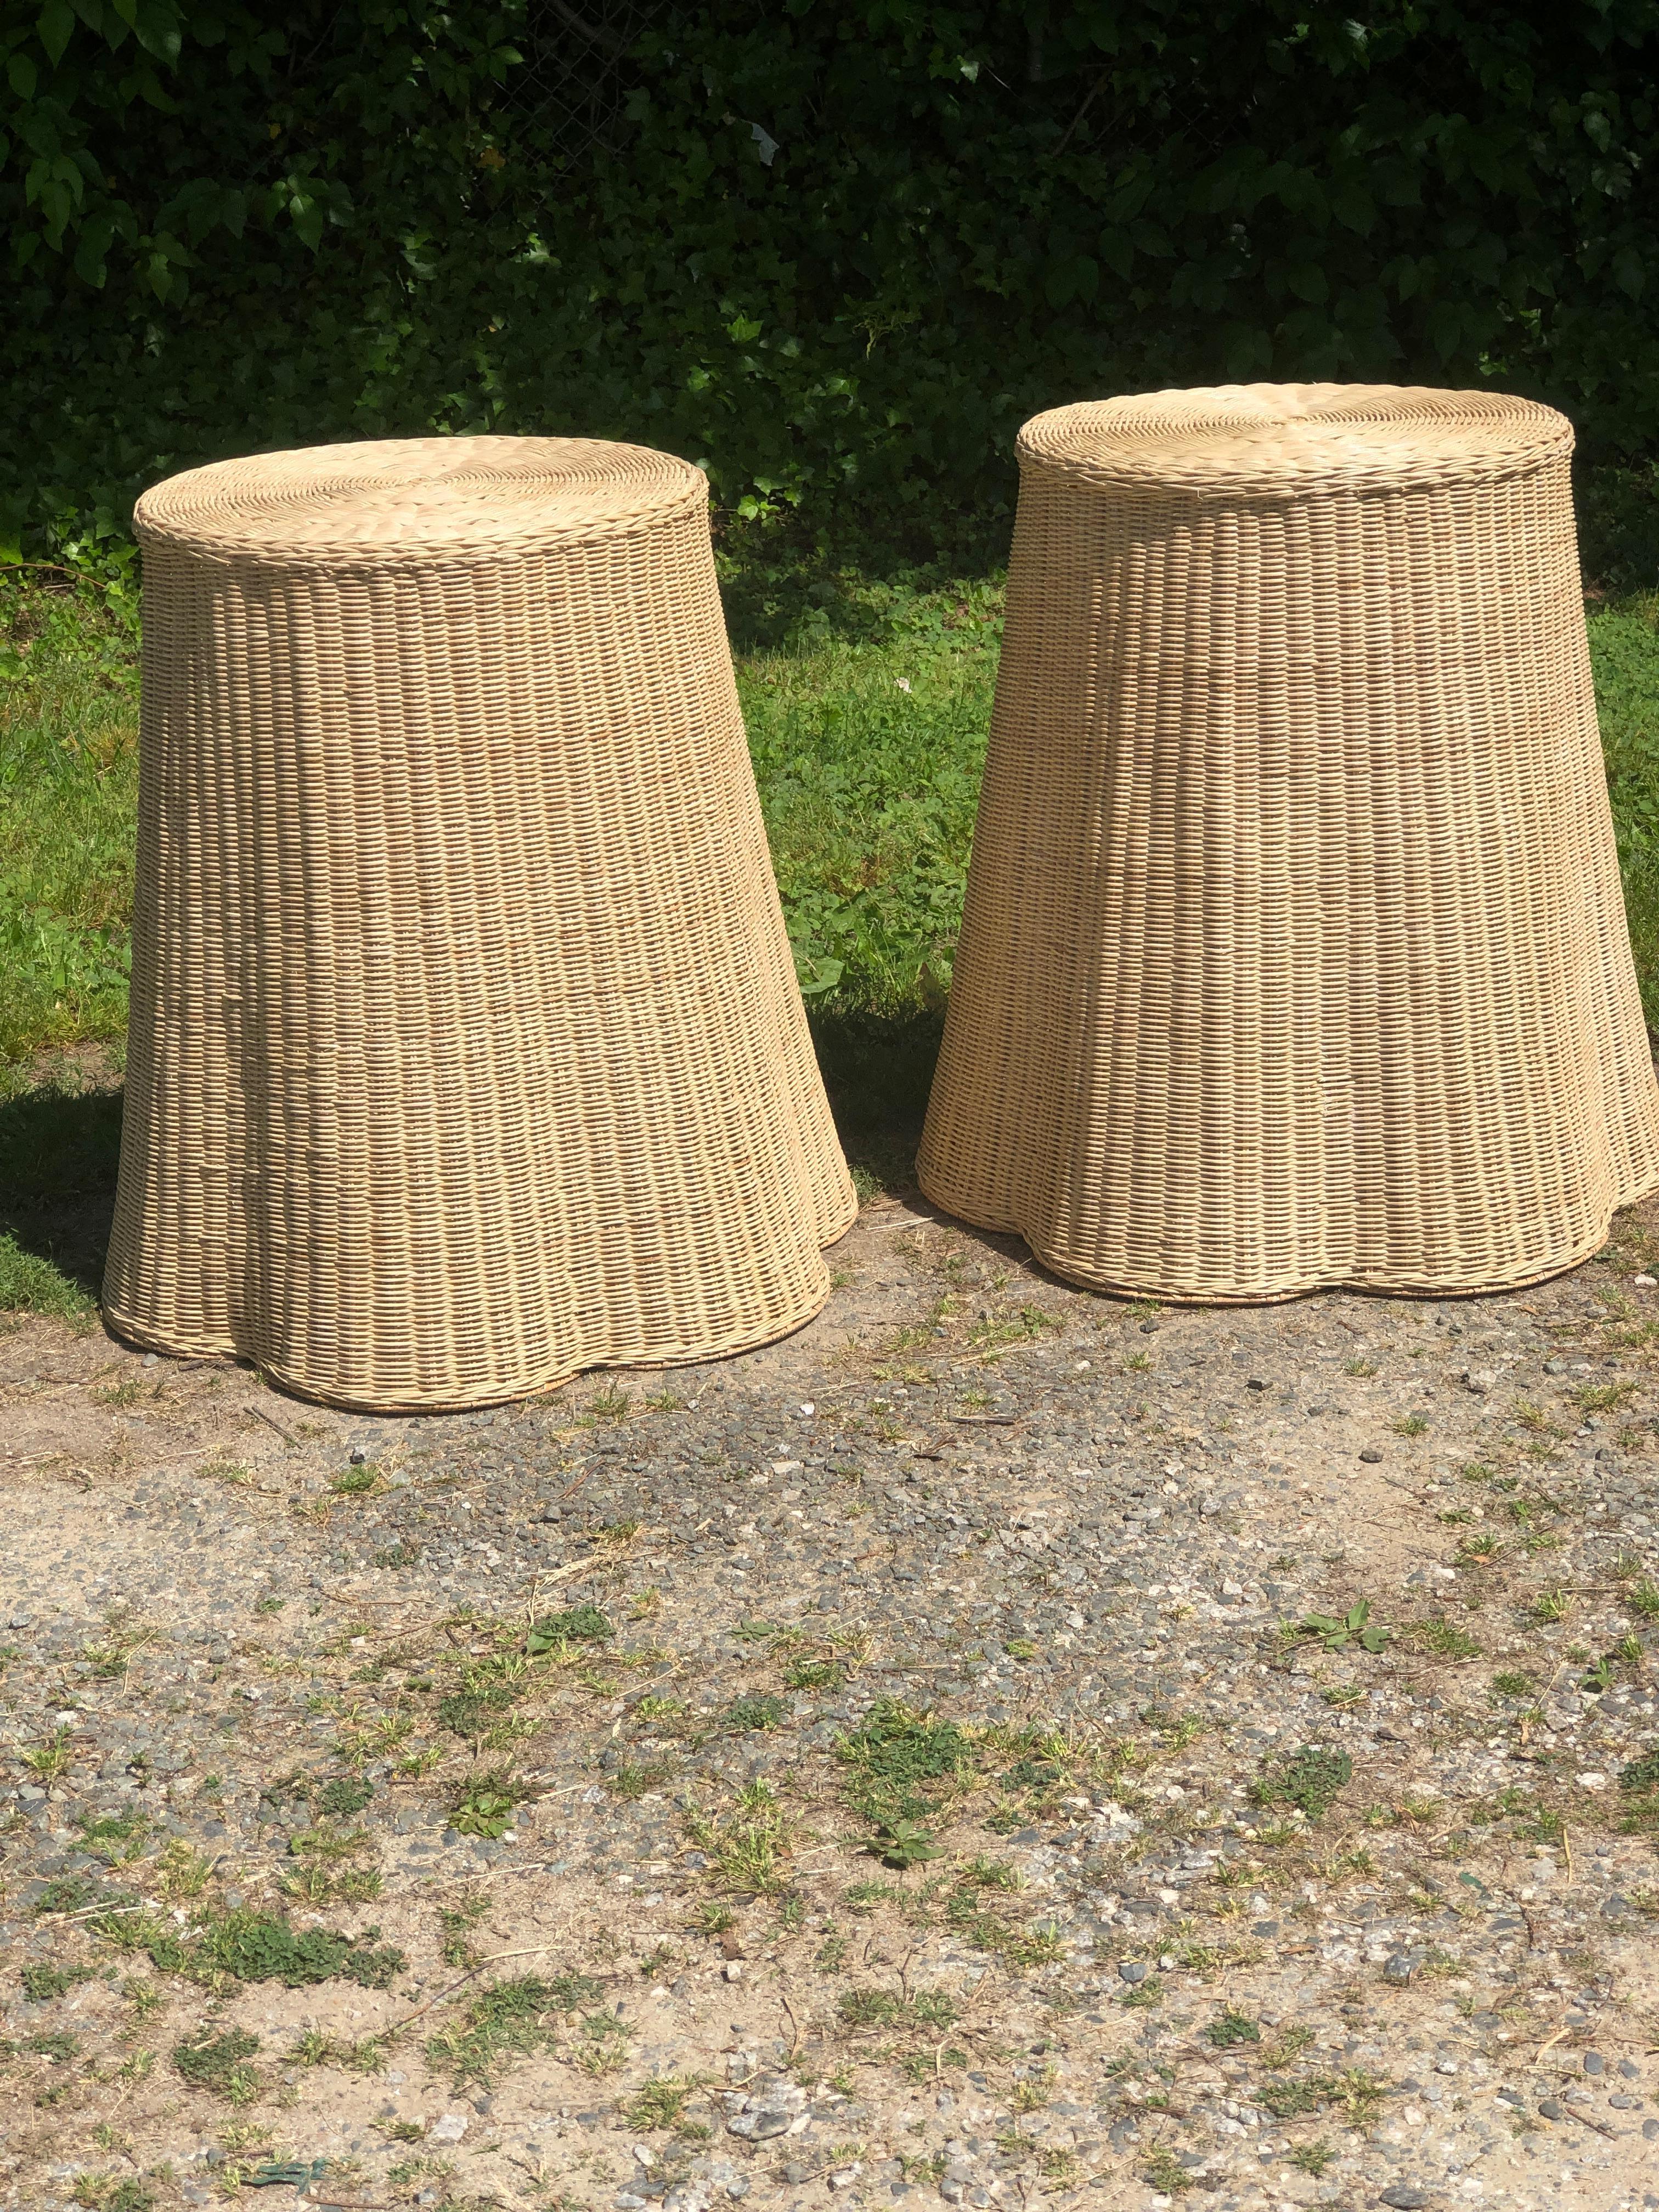 Rare pair of vintage organic trompe l’oeil natural wicker side tables or stands. These examples have a lovely draped illusion adding to their sophistication yet playfulness form. The vintage rattan has a neutral coloring  that makes it a perfect